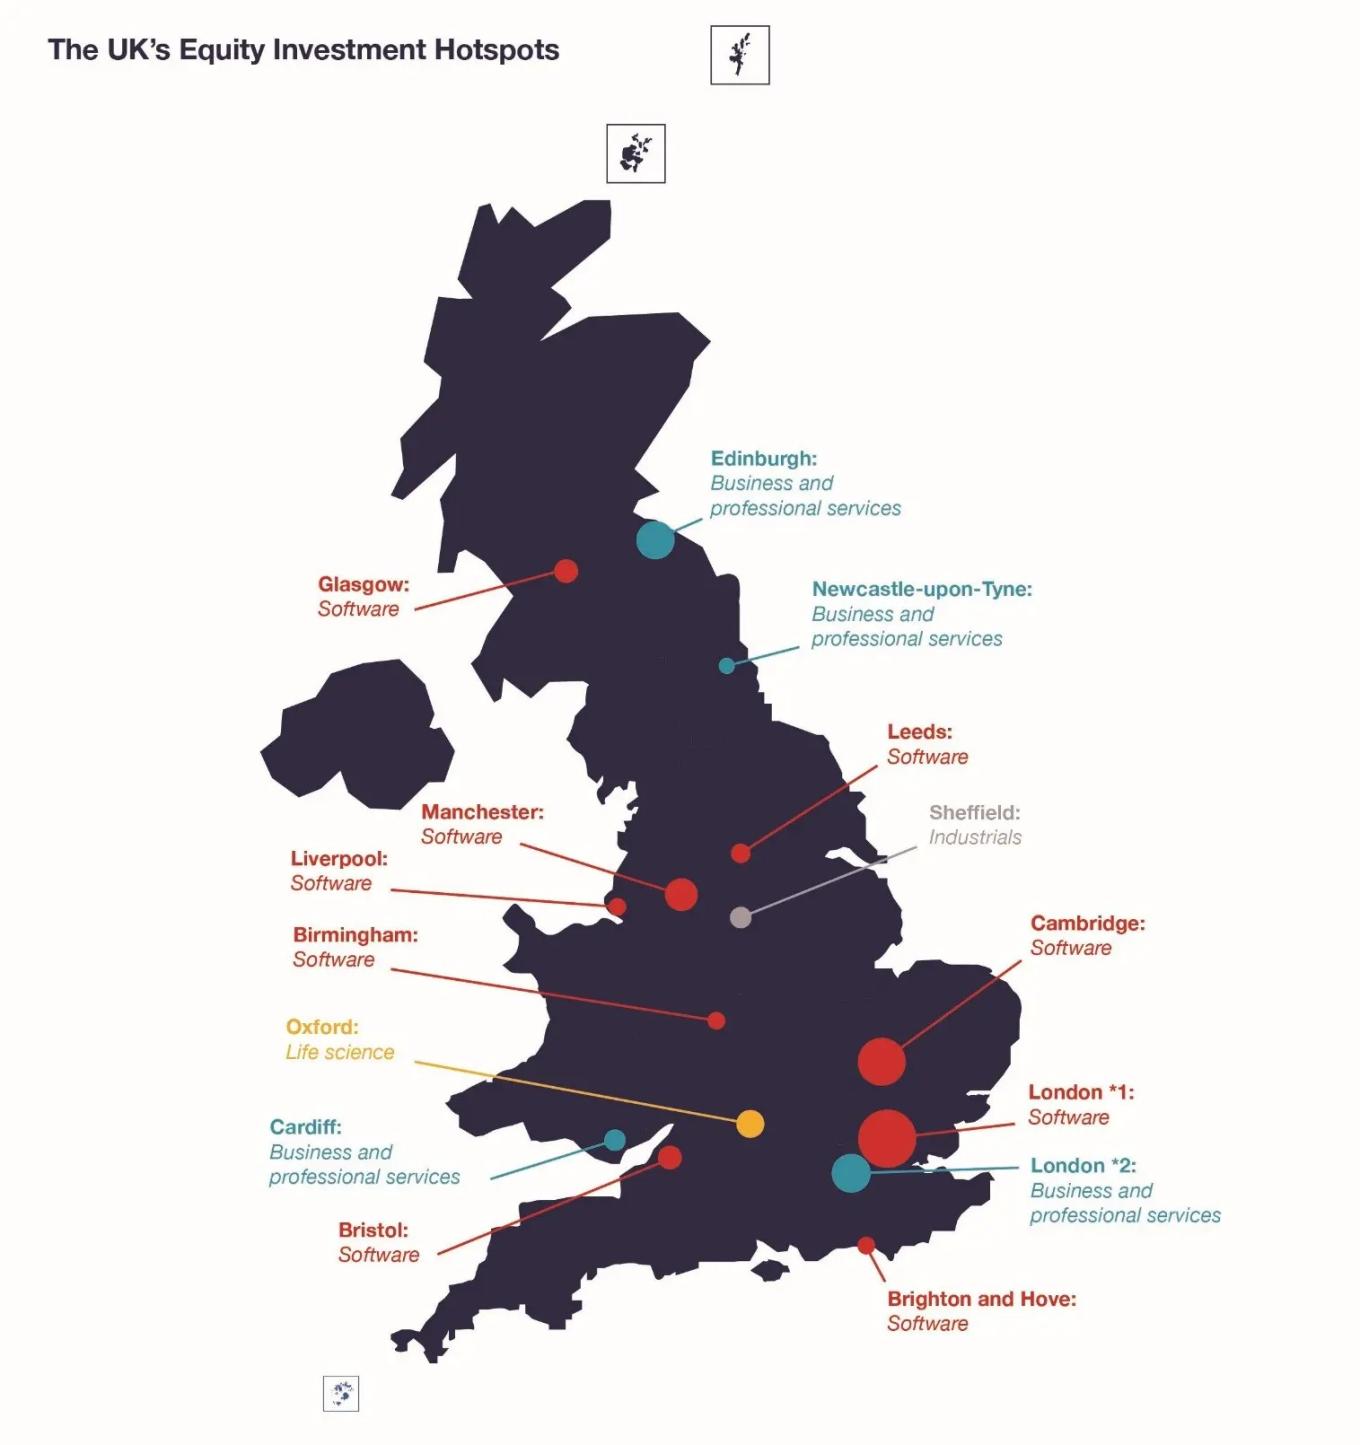 The UK's Equity Investment Hotspots map